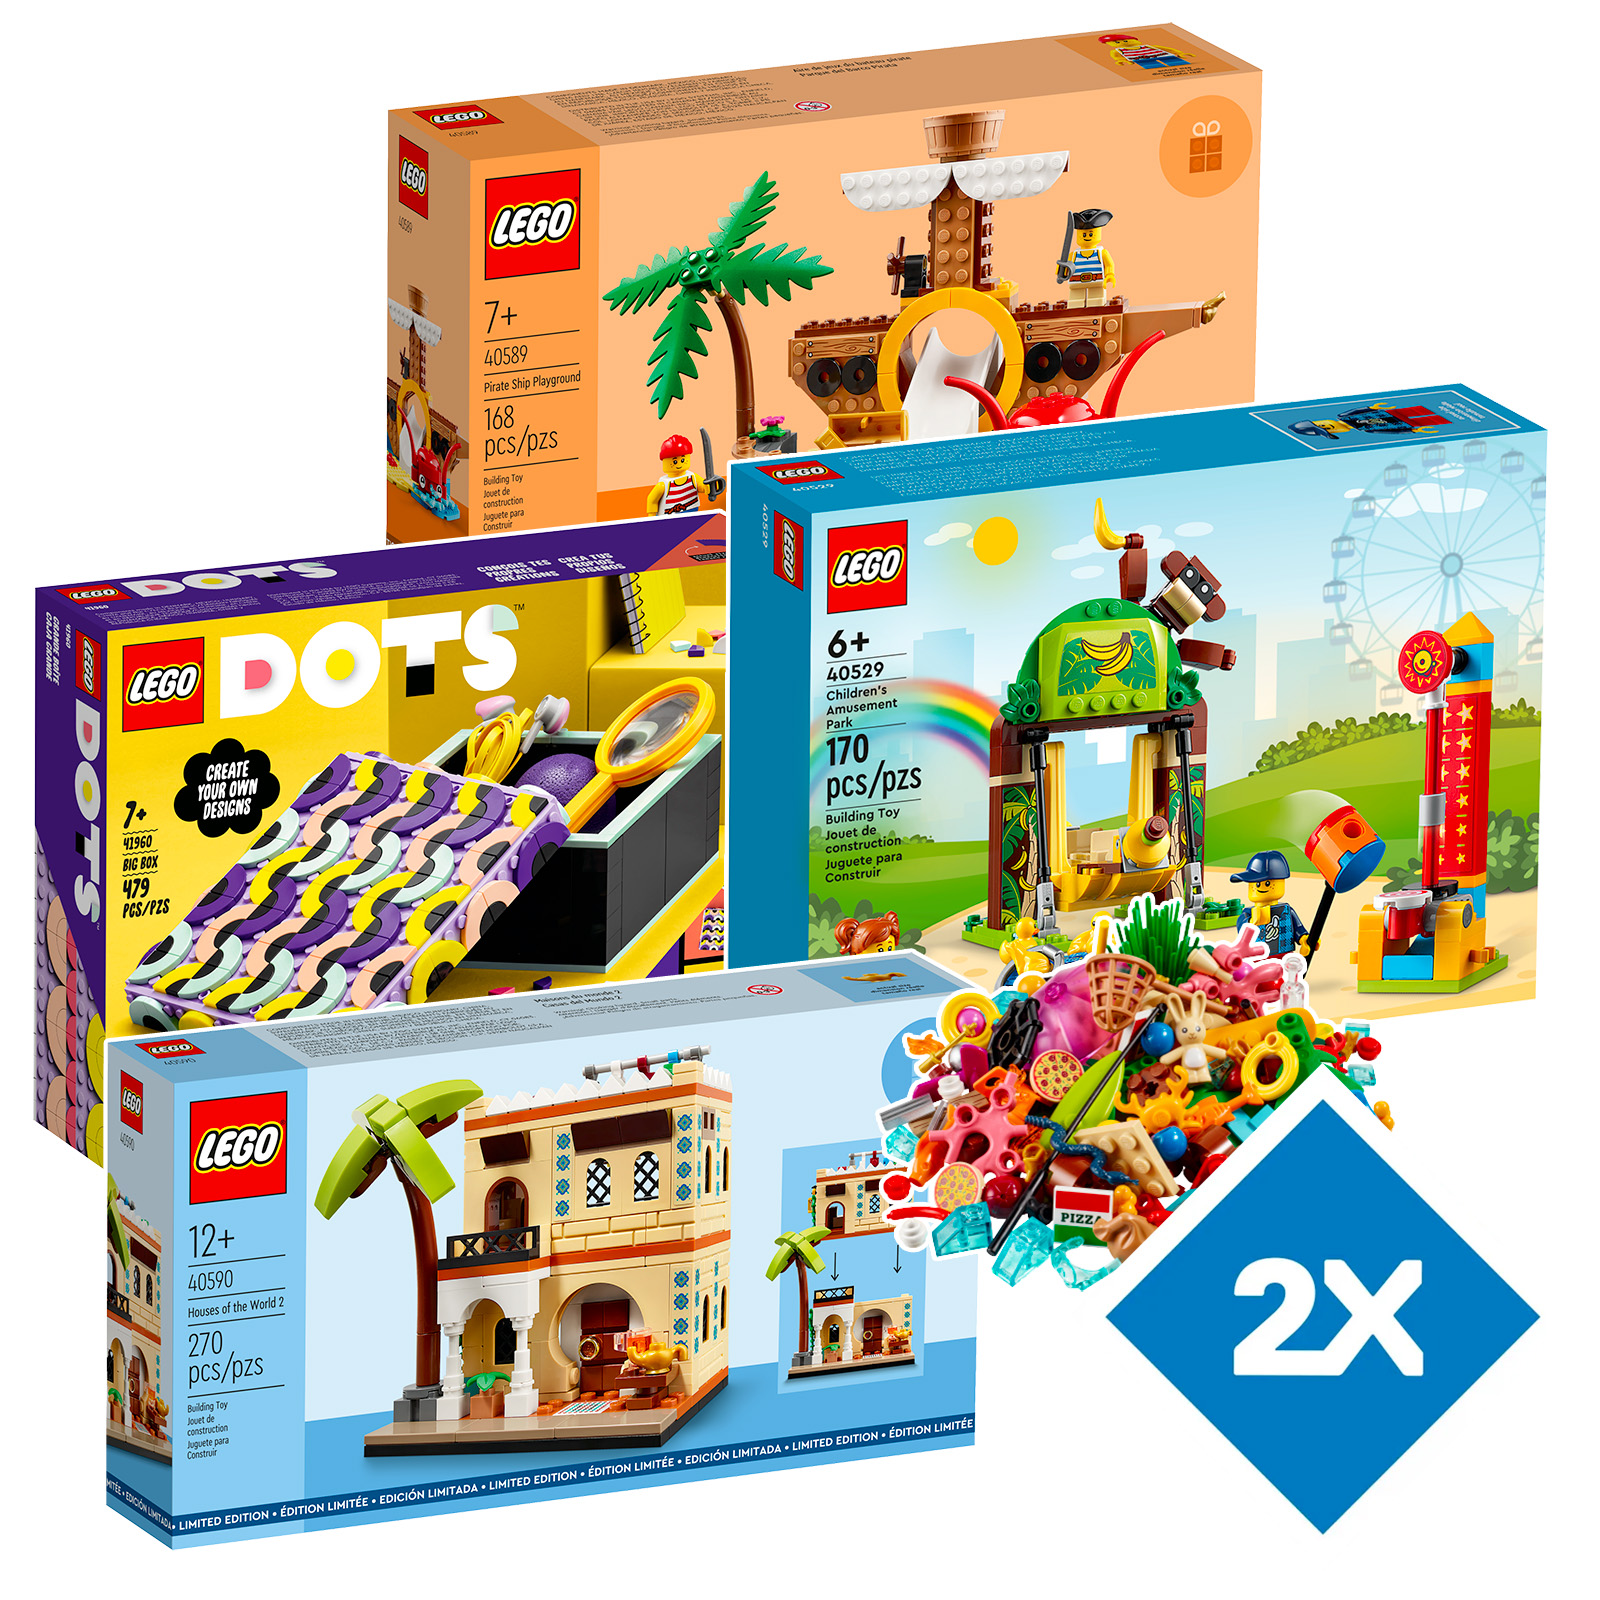 ▻ On the LEGO Shop: details of the next planned promotional